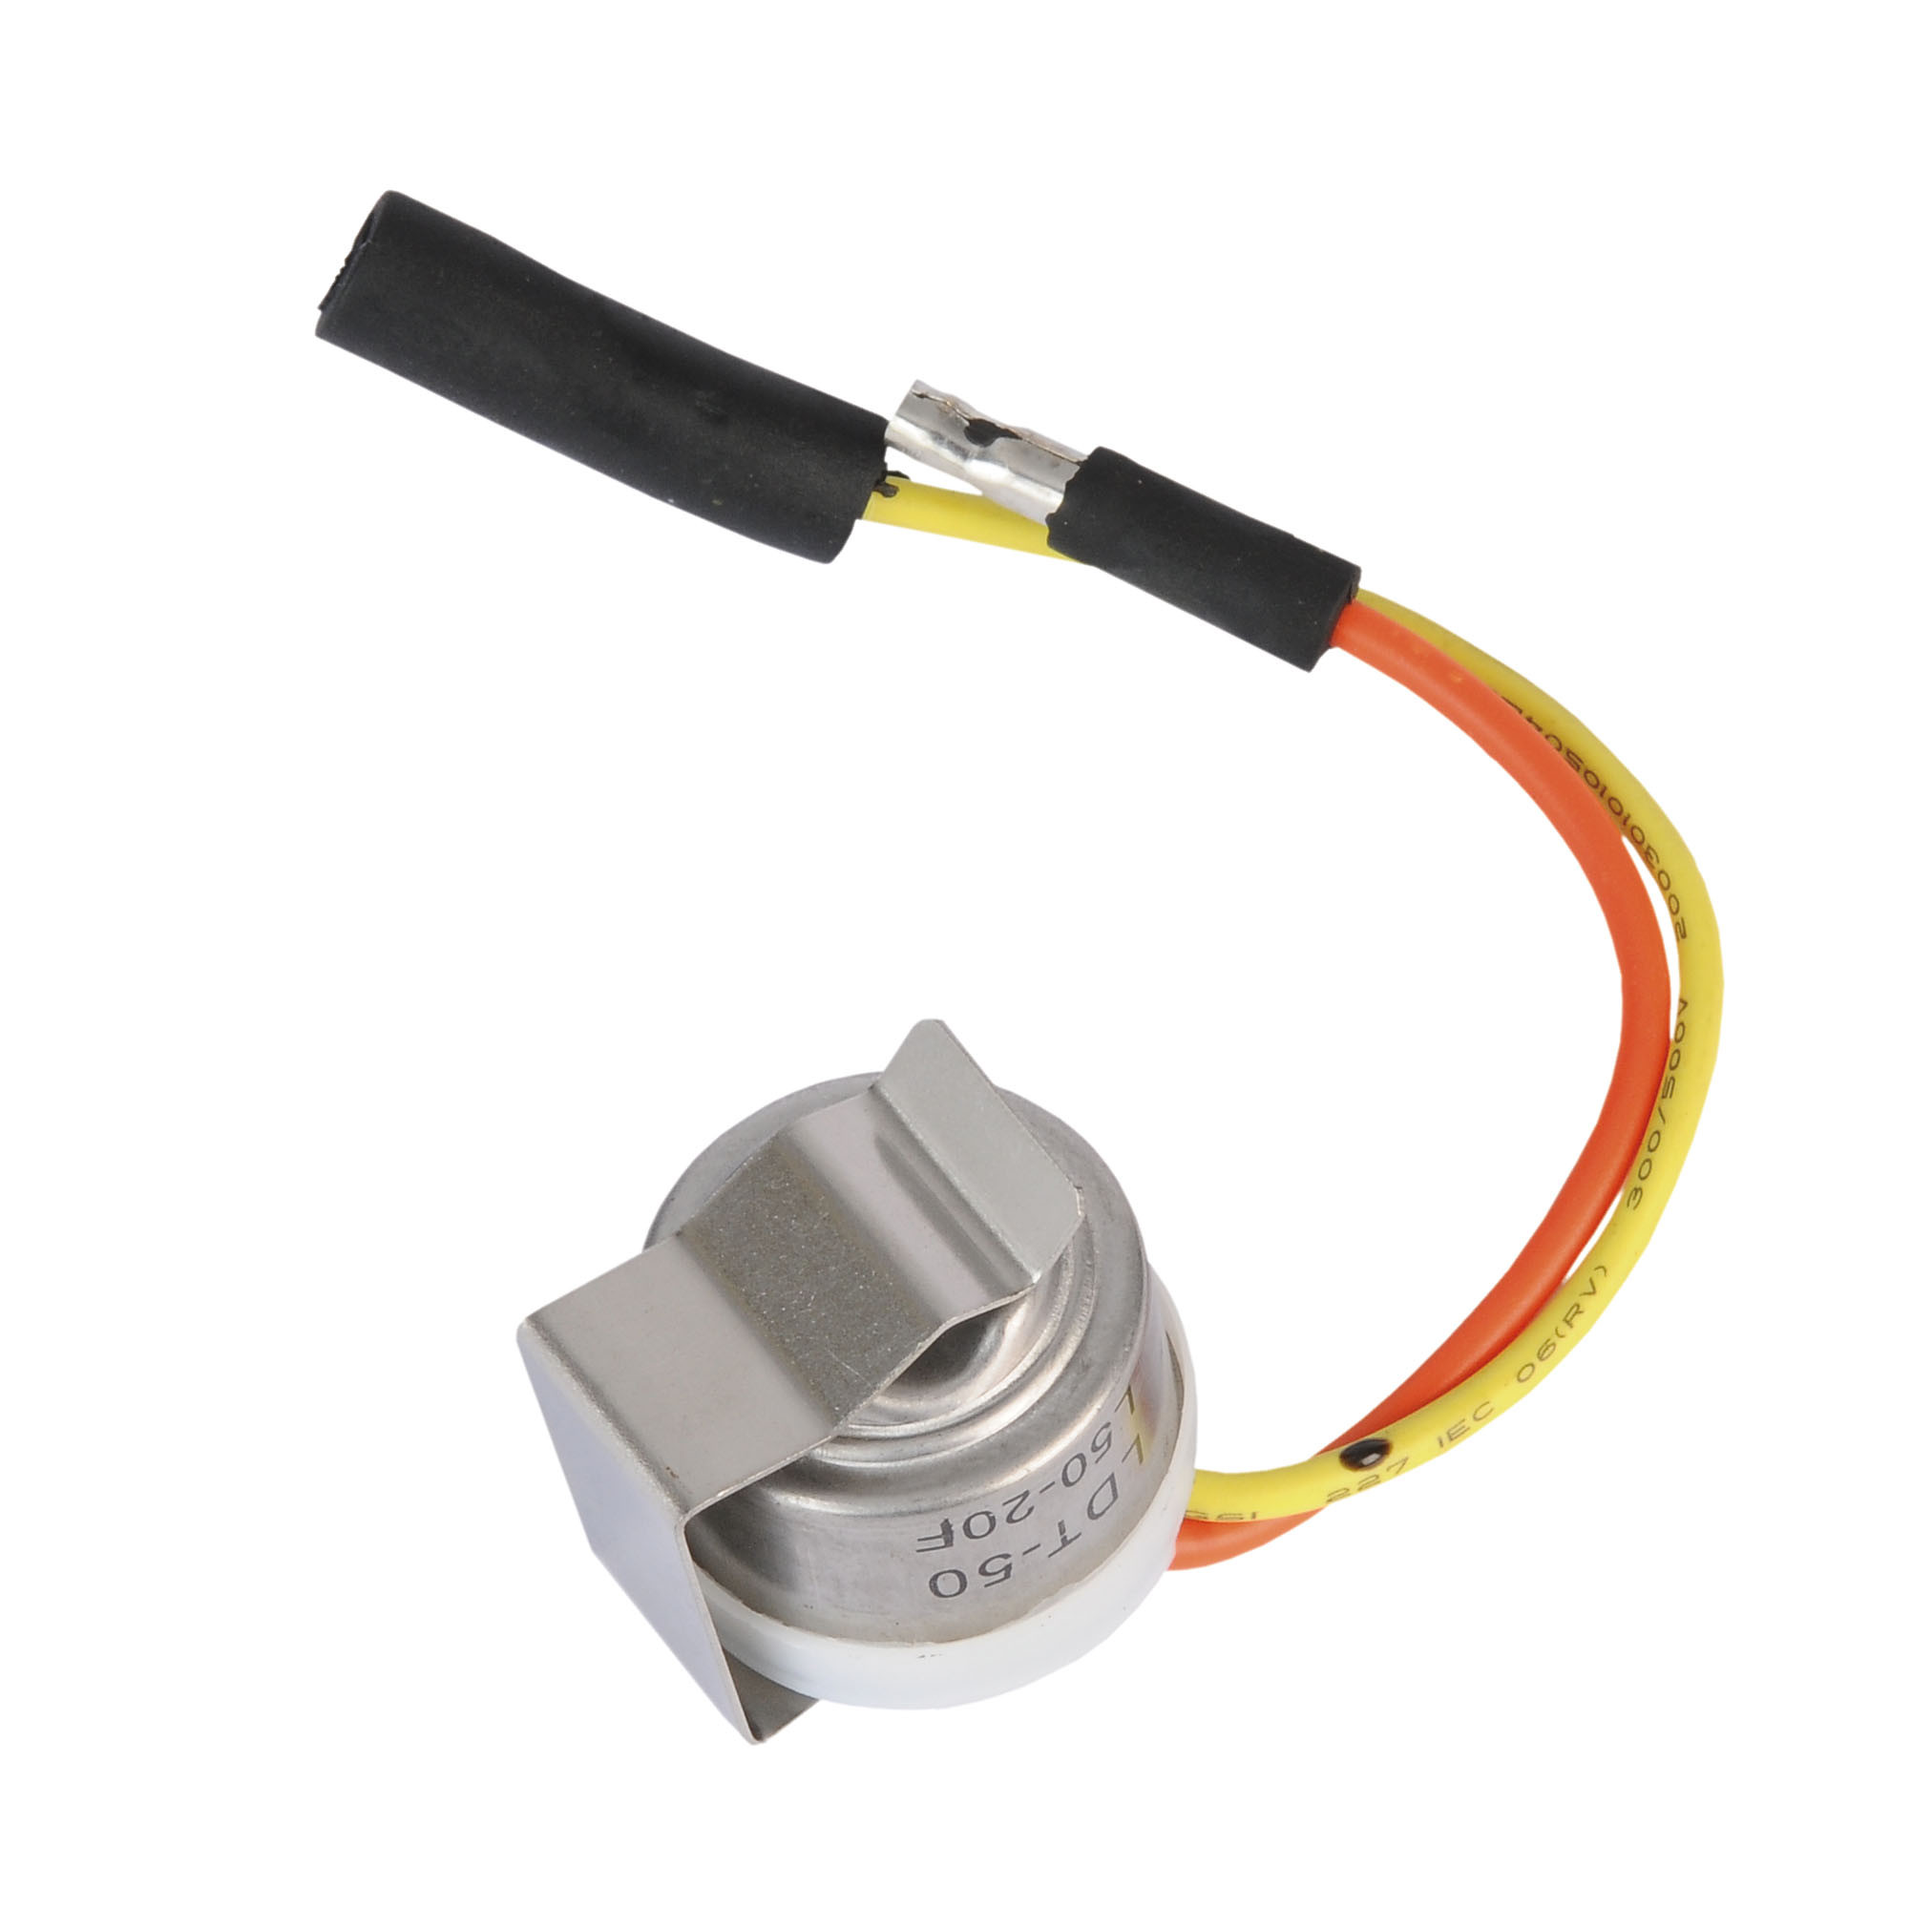 Buy cheap Refrigerator Bimetal Thermostat / Refrigerator Defrost Thermostat / D45-D70 from wholesalers